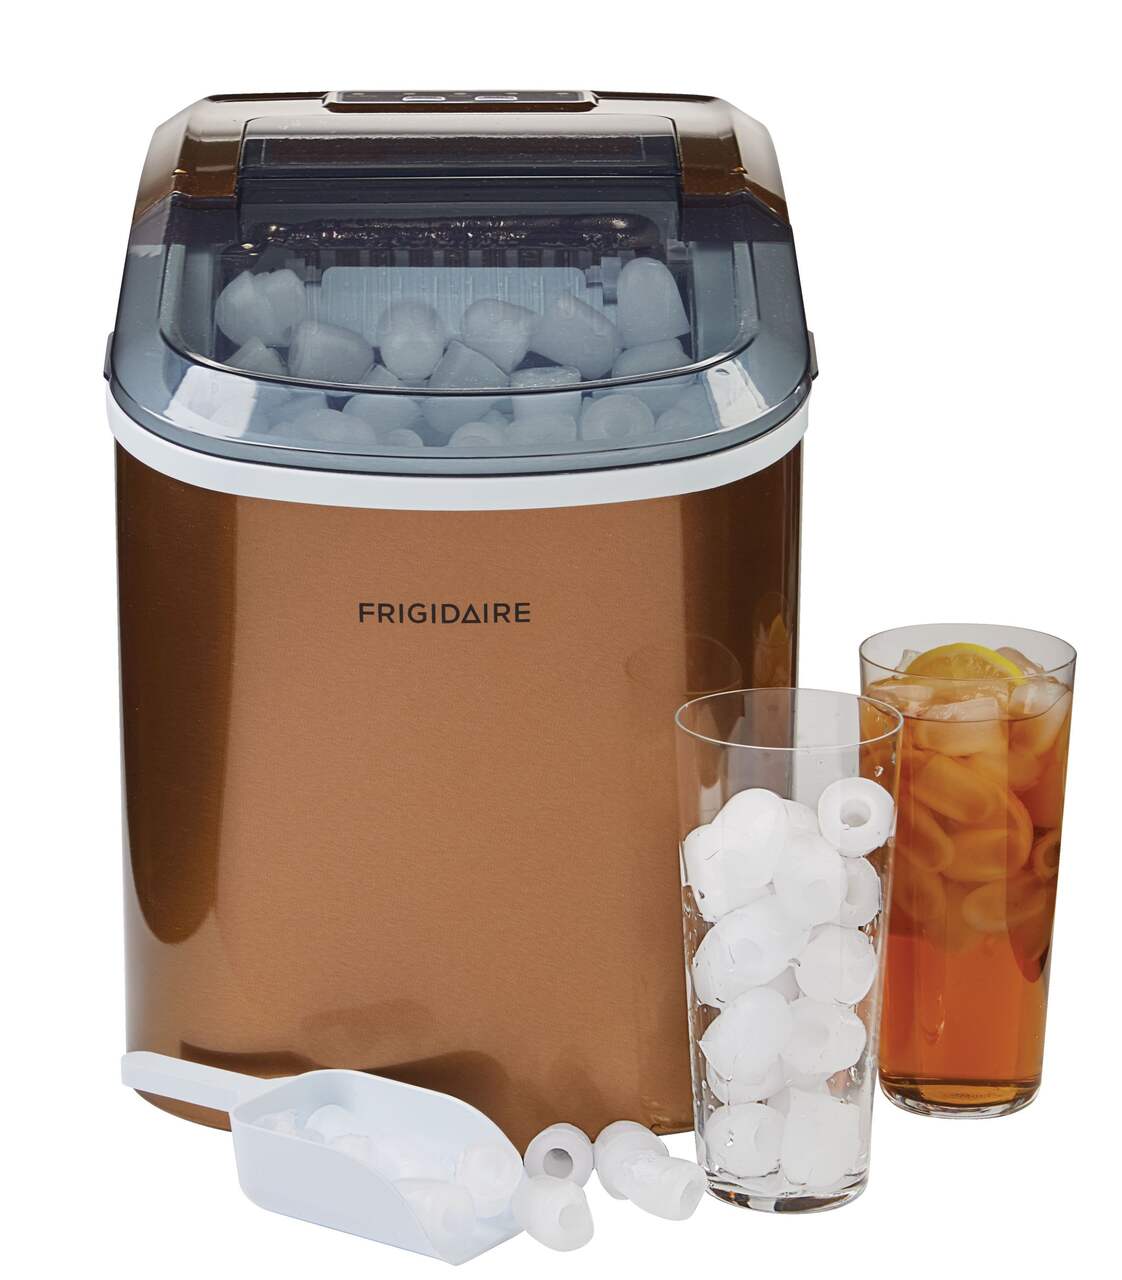 Frigidaire Countertop 26-Pound Ice Maker Red